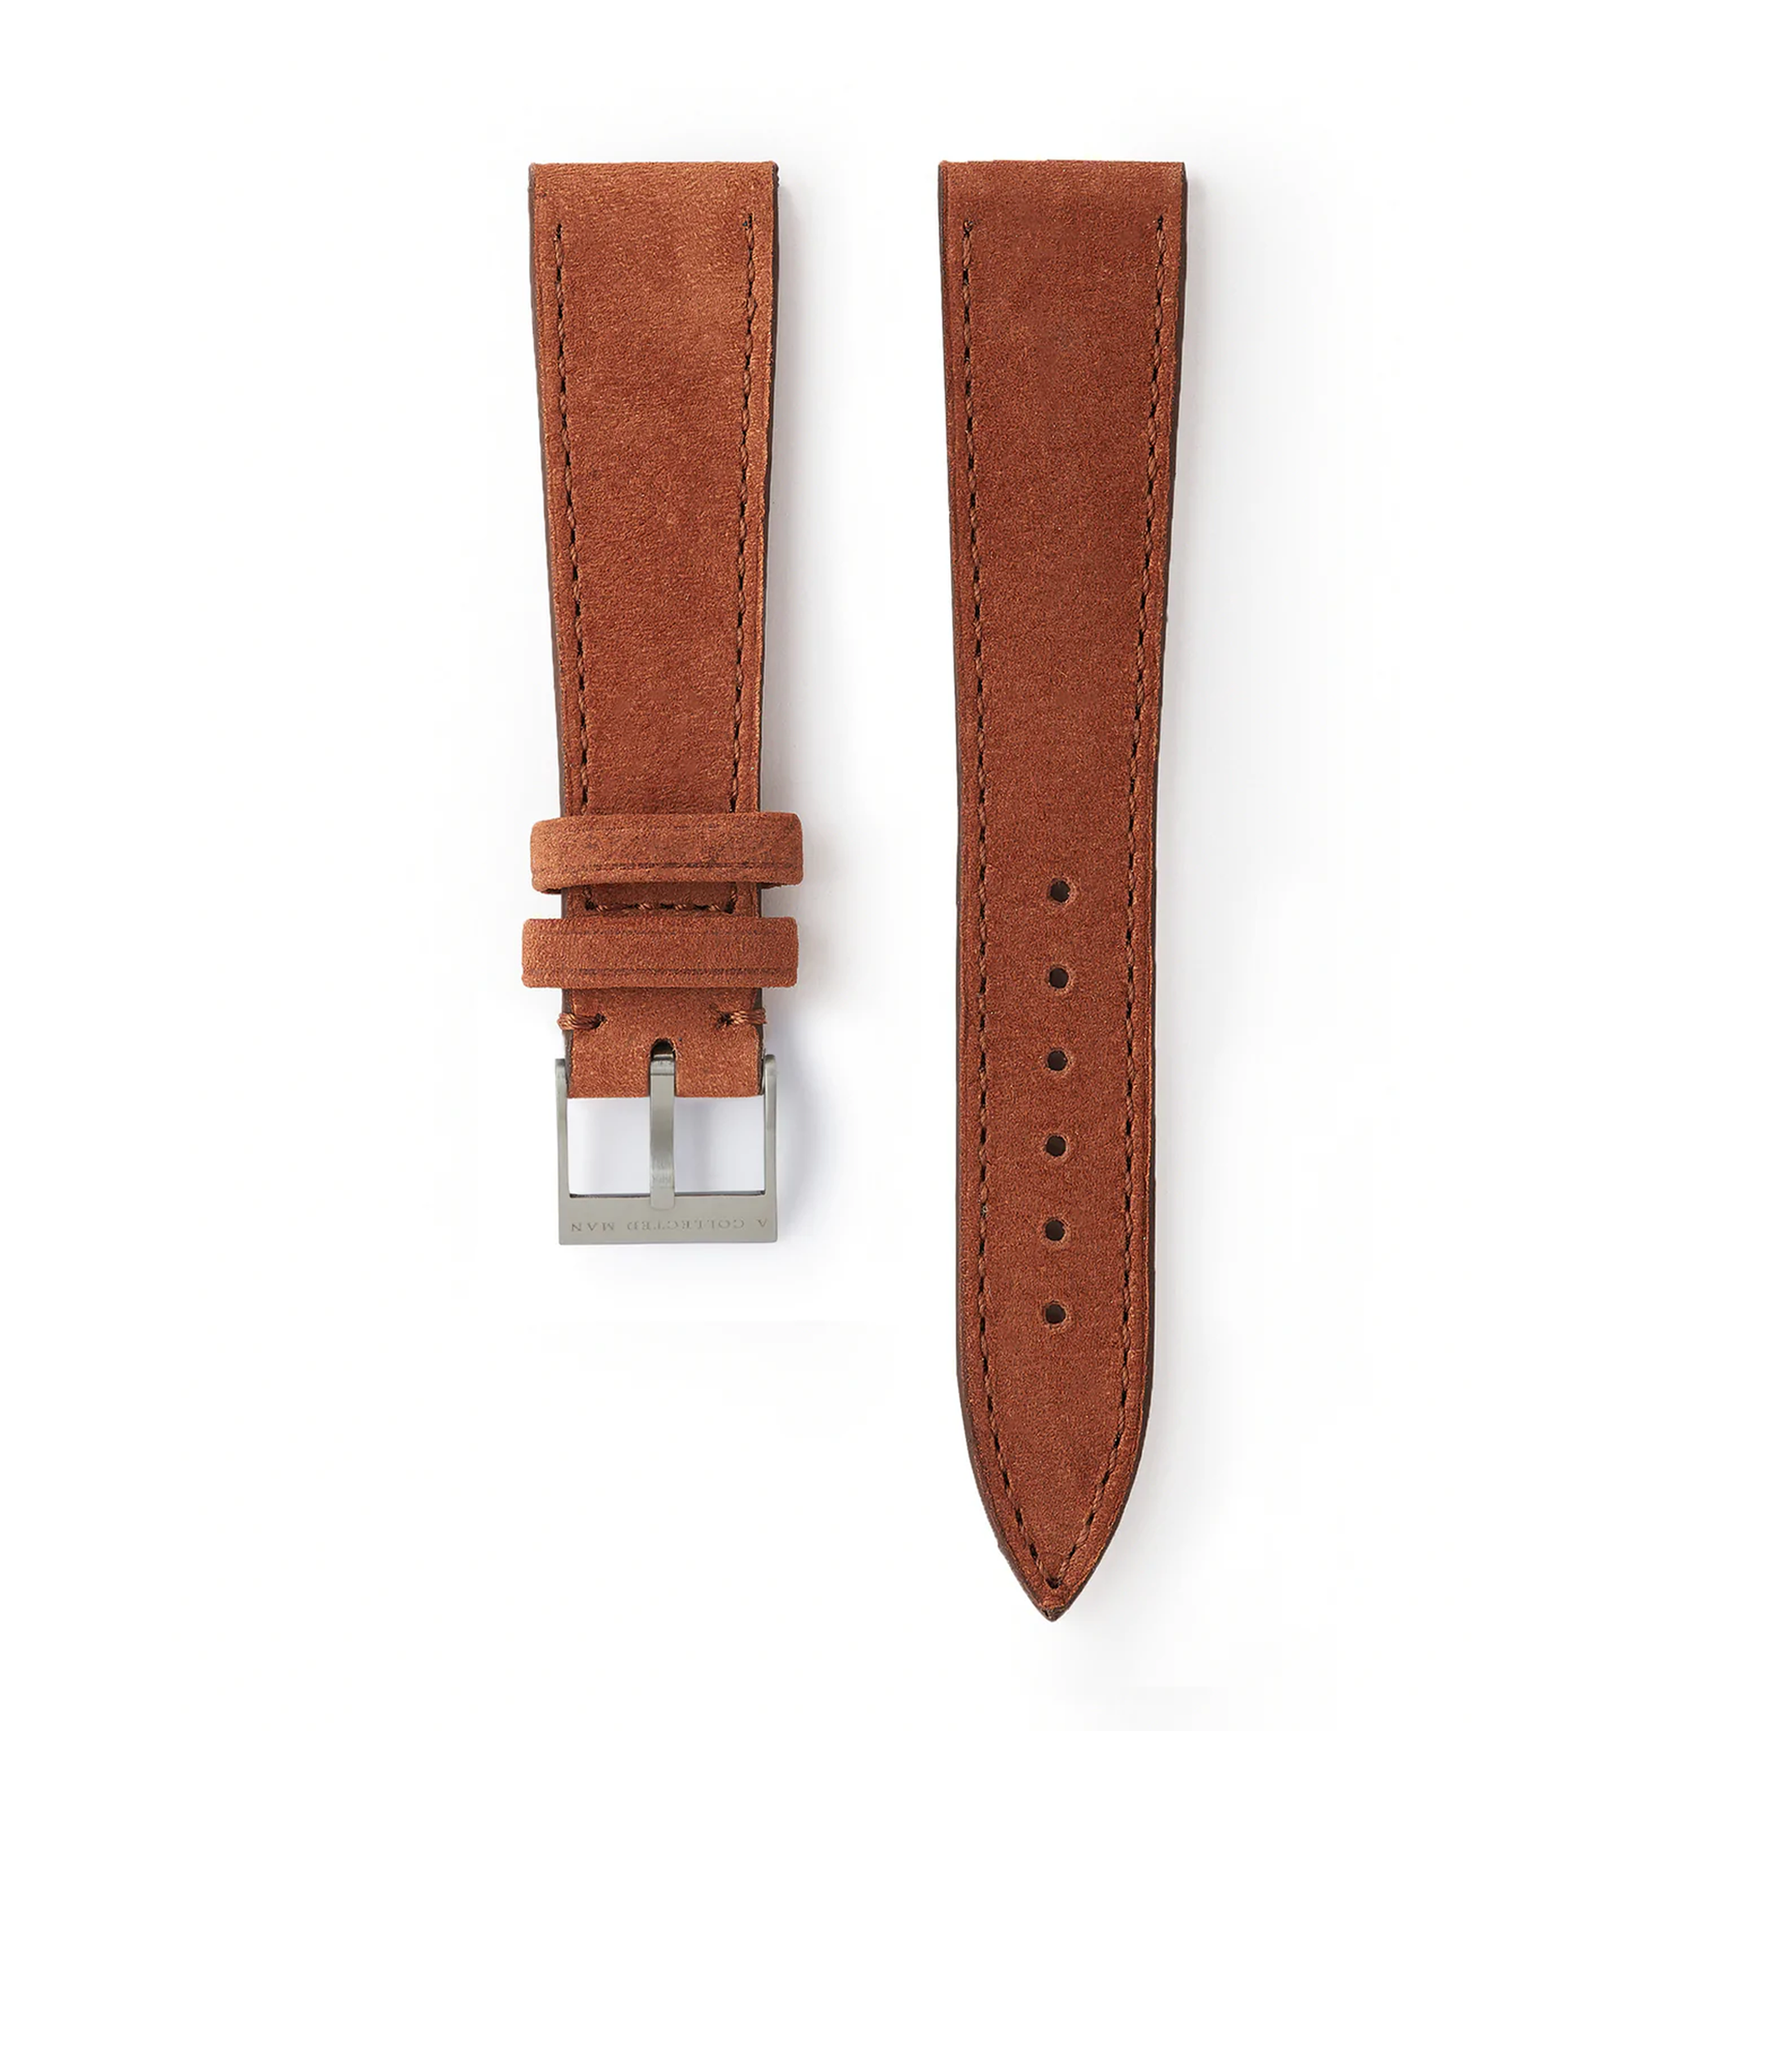 Buy Bordeaux JPM watch strap rich brown nubuck quick-release springbars buckle handcrafted European-made for sale online at A Collected Man London